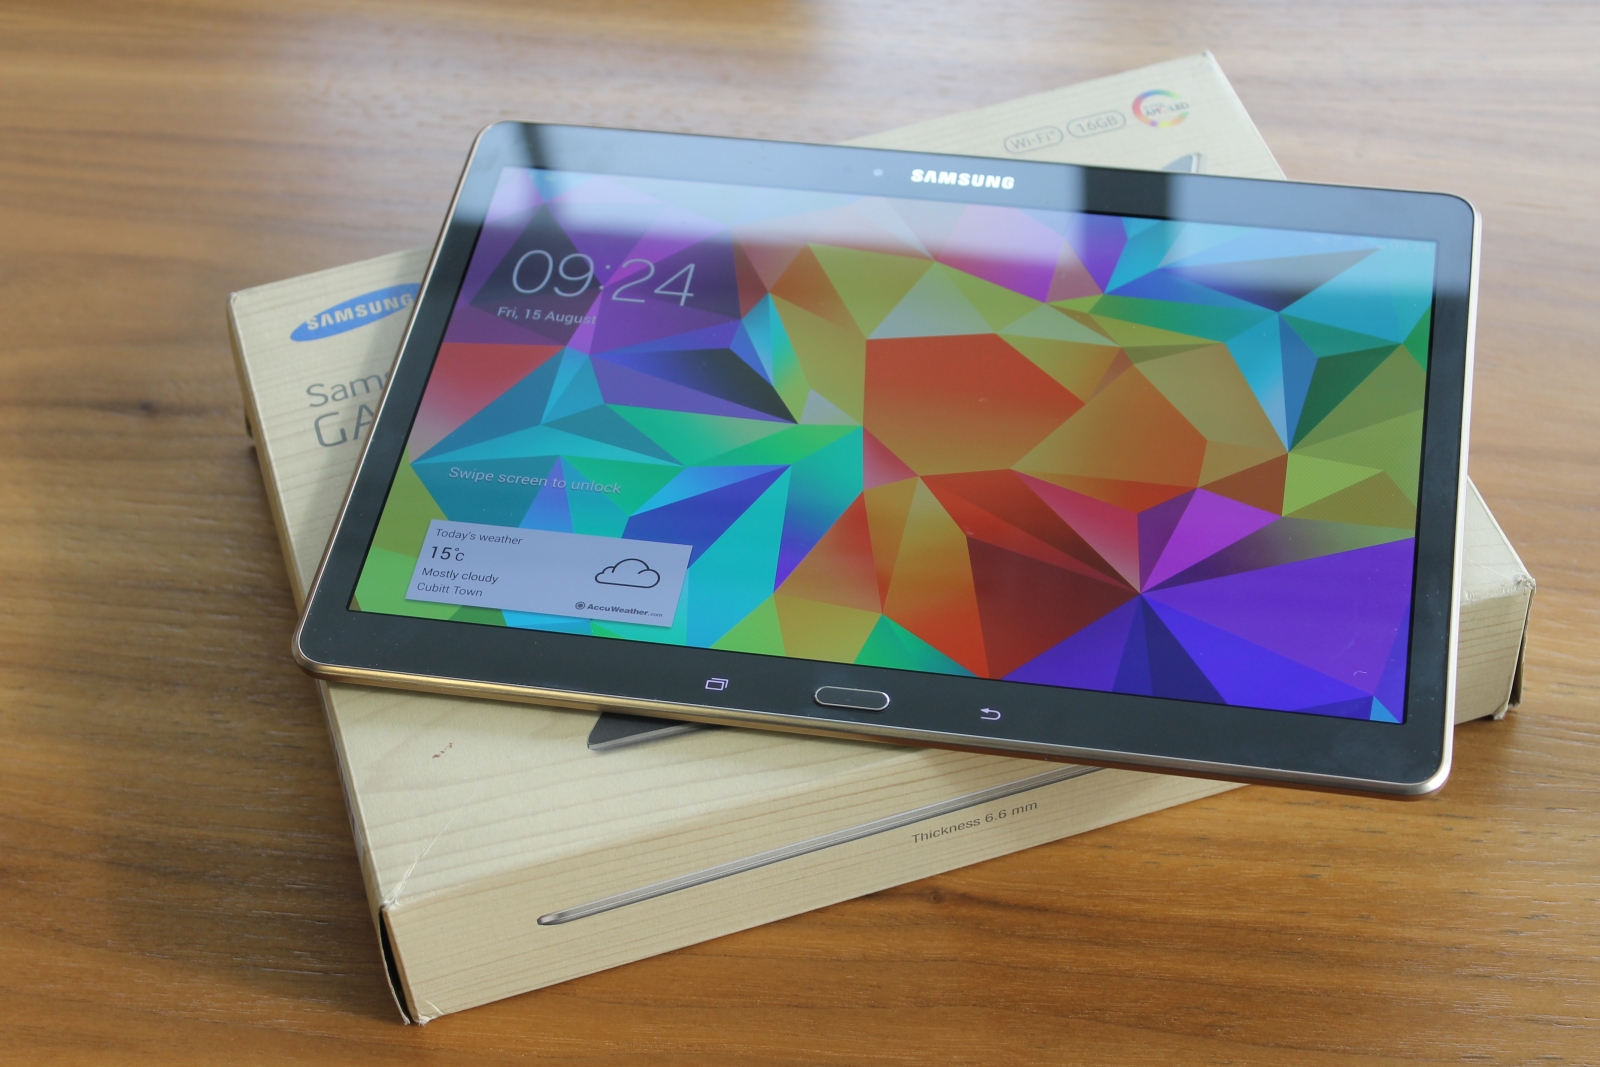 Samsung Galaxy Tab S 10.5 tablets on T-Mobile getting Android Lollipop ...